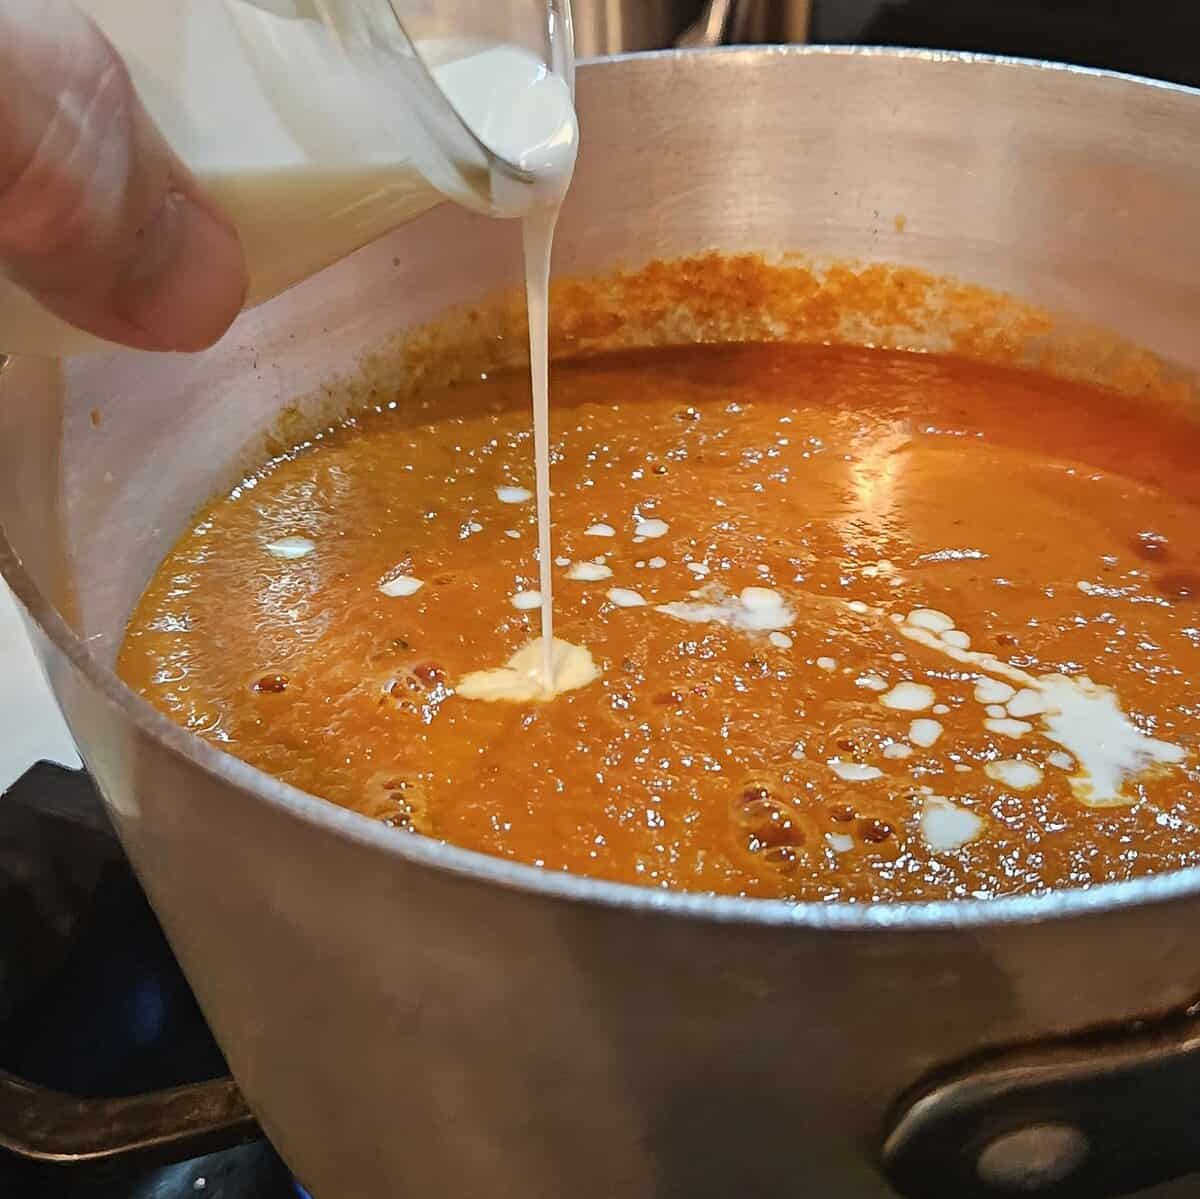 tomato soup in a saucepan with heavy cream being poured in.